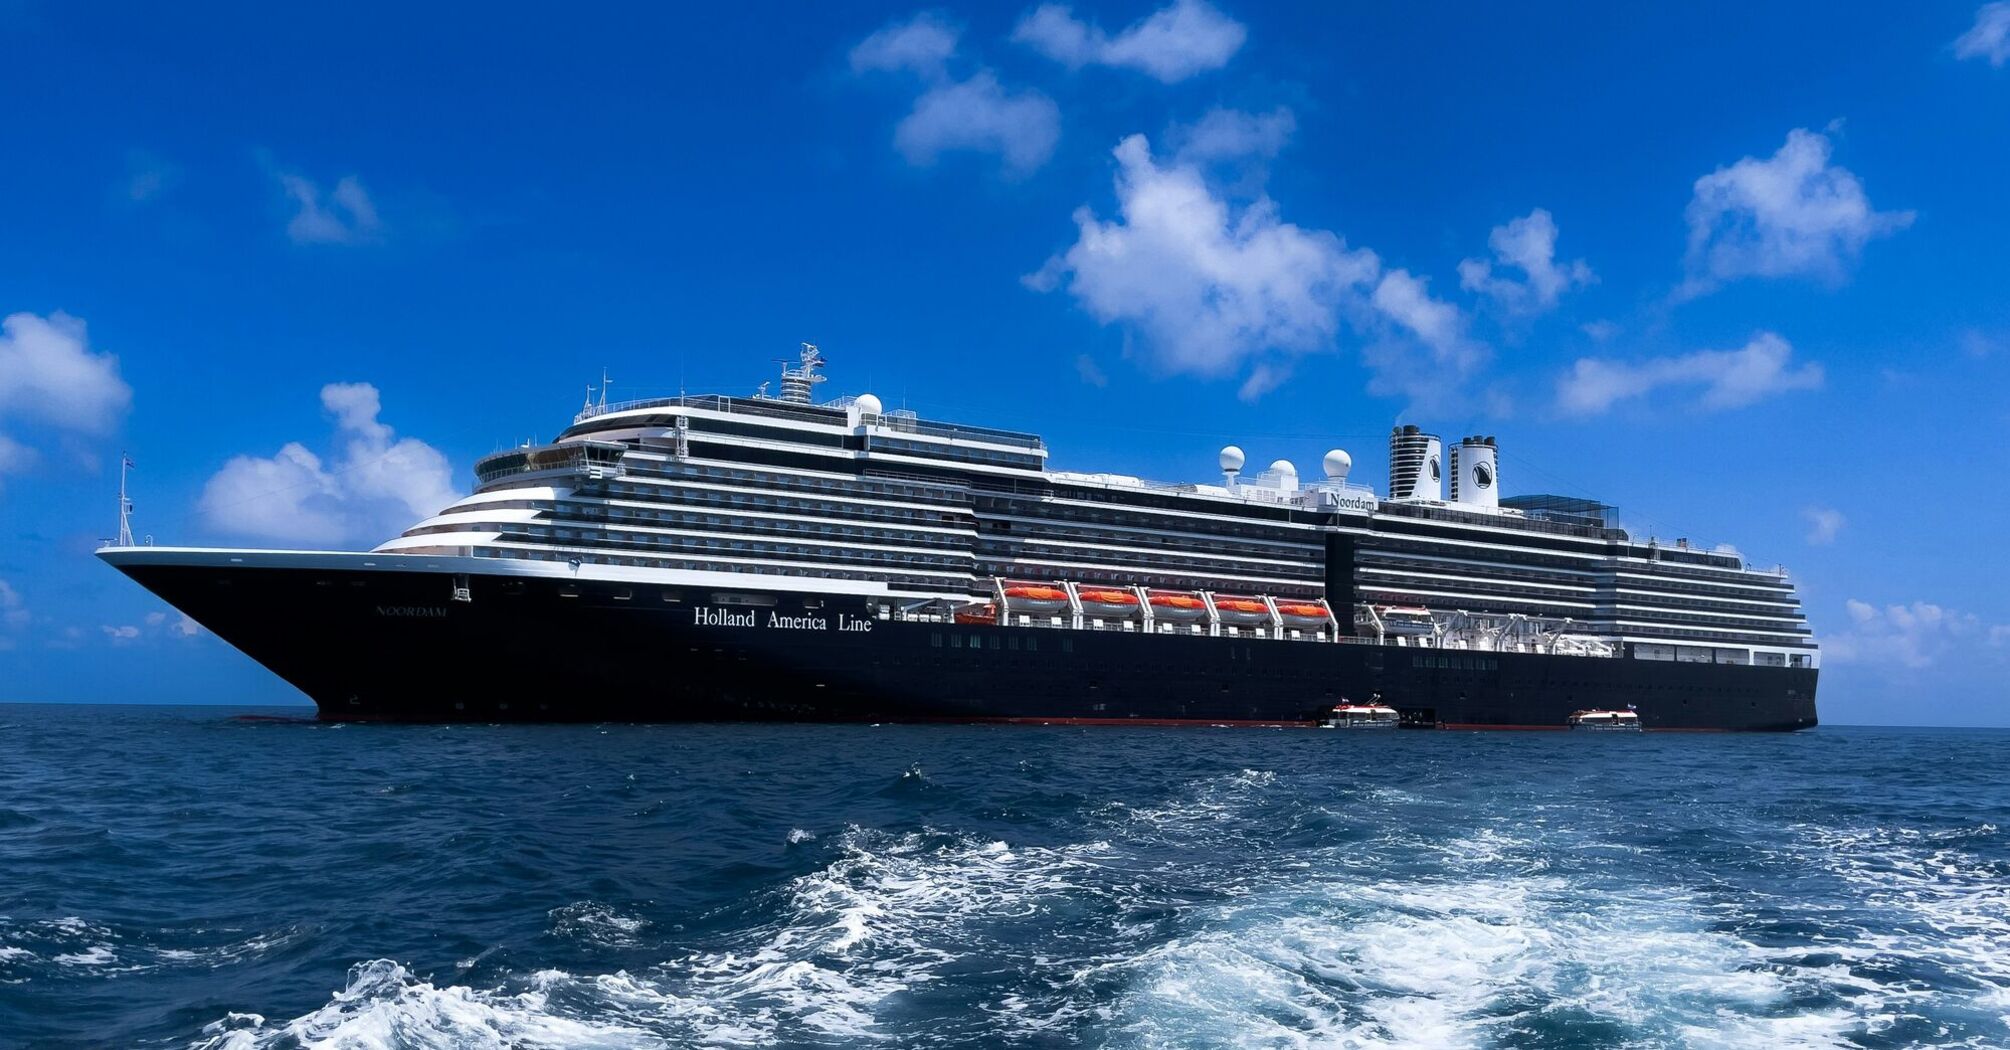 Around the world cruise trip: Holland America Line prepares to cover 7 continents in 2026